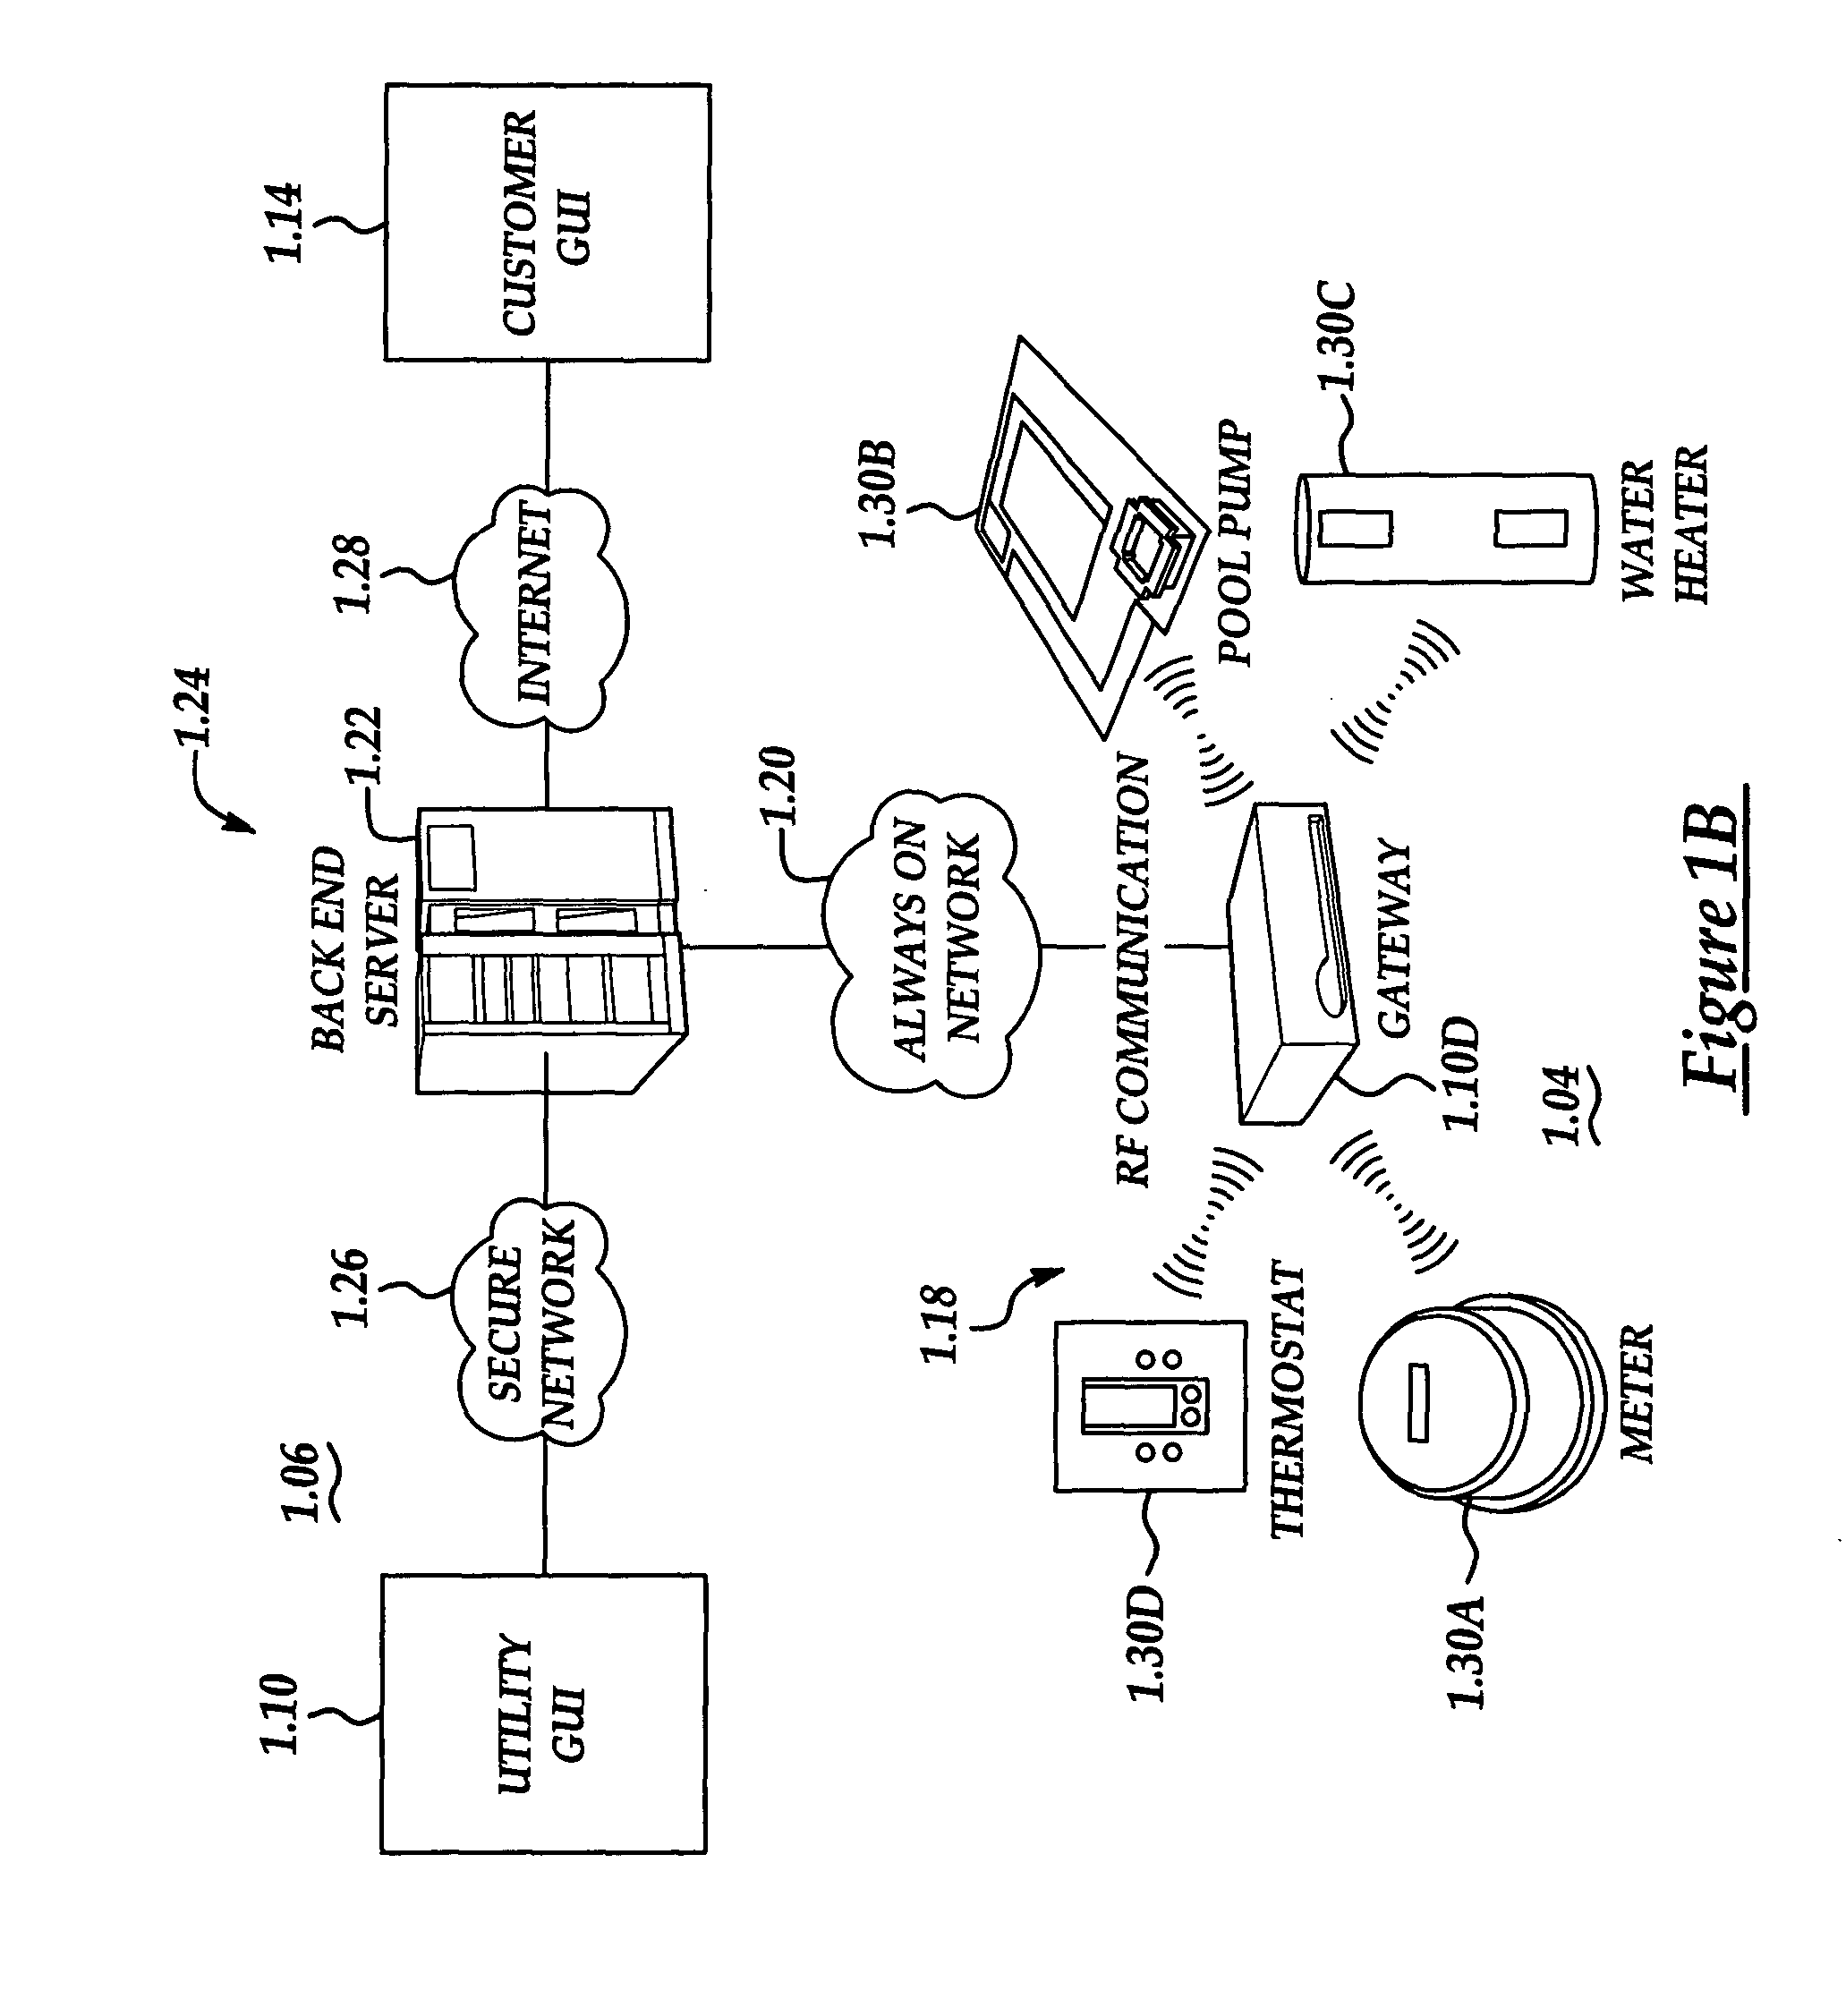 Configurable architecture for controlling delivery and/or usage of a commodity